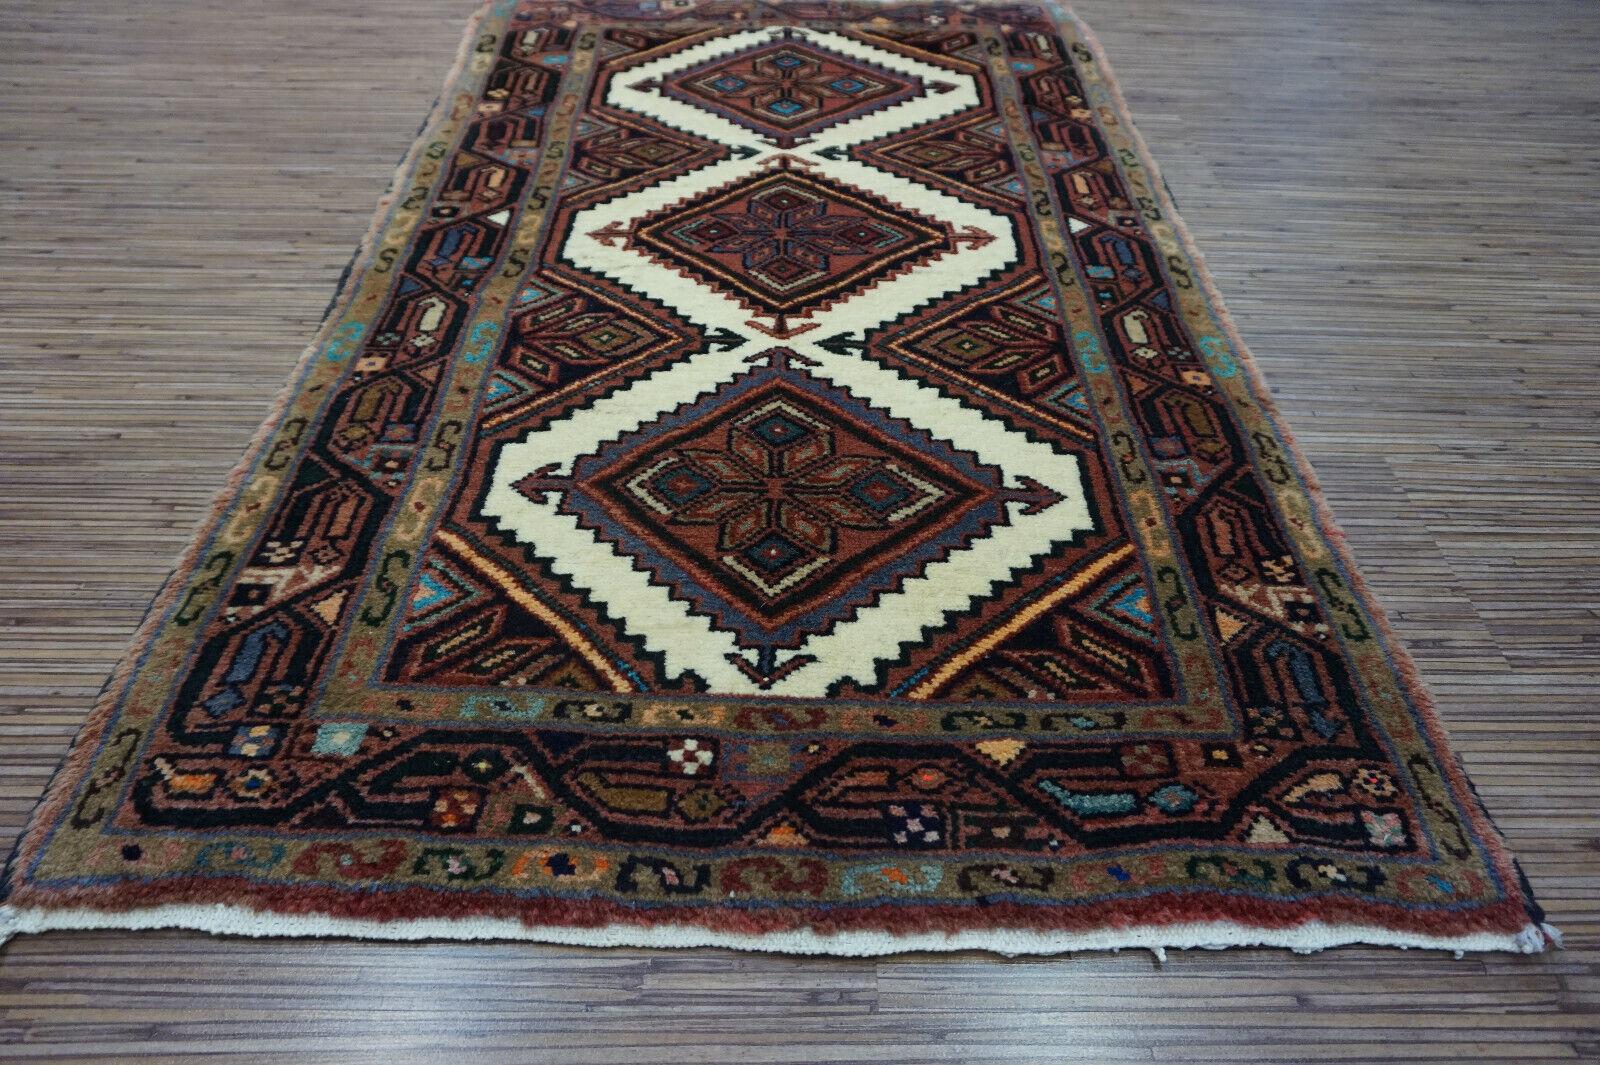 Handmade Vintage Persian Style Hamadan Rug 2.3' x 3.9', 1970s - 1D51 In Good Condition For Sale In Bordeaux, FR